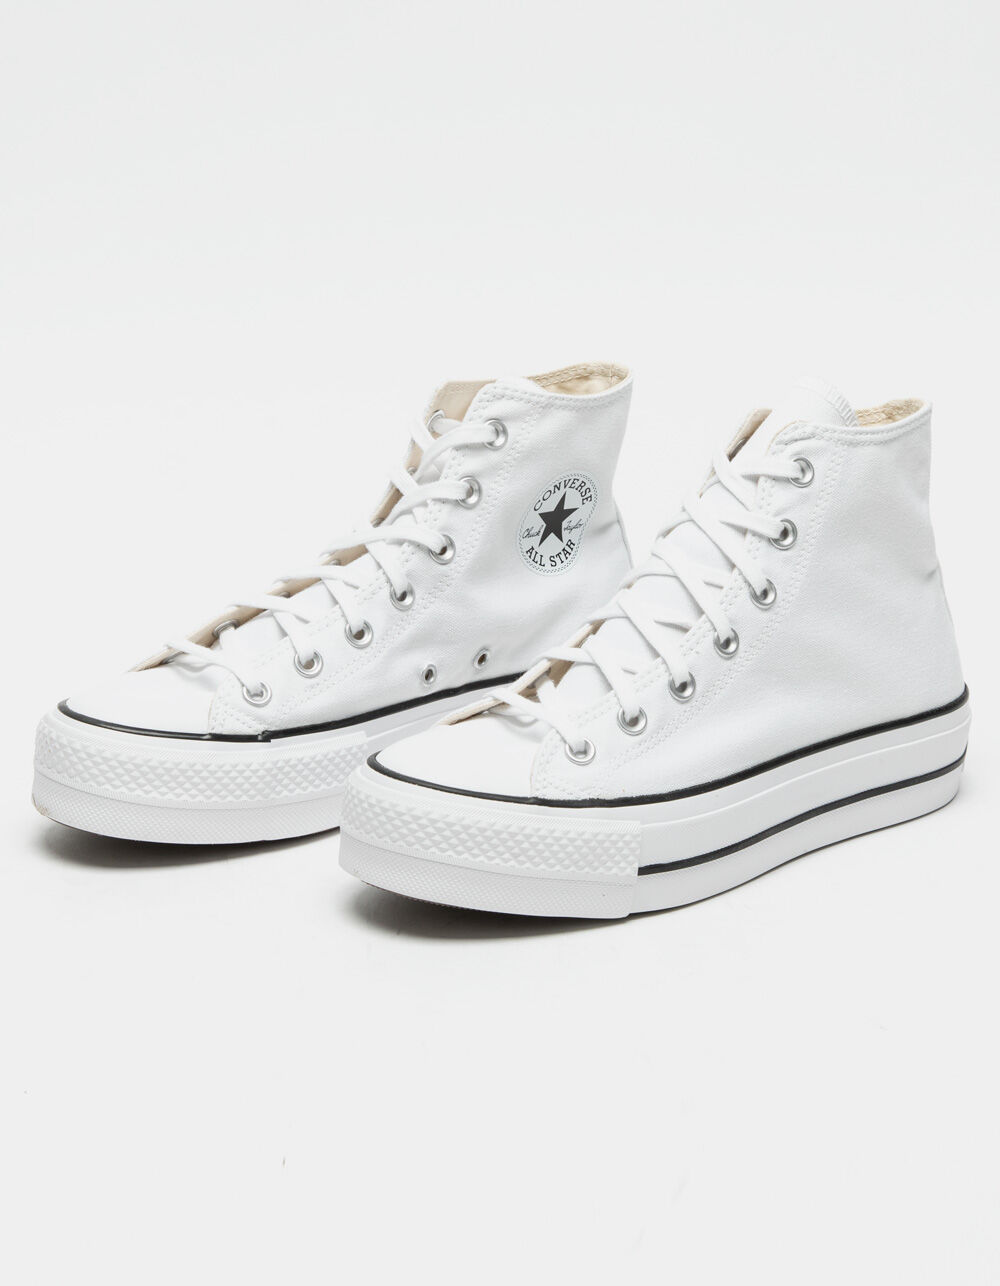 dommer klik skam CONVERSE Chuck Taylor All Star Lift Womens High Top Shoes - WHITE | Tillys